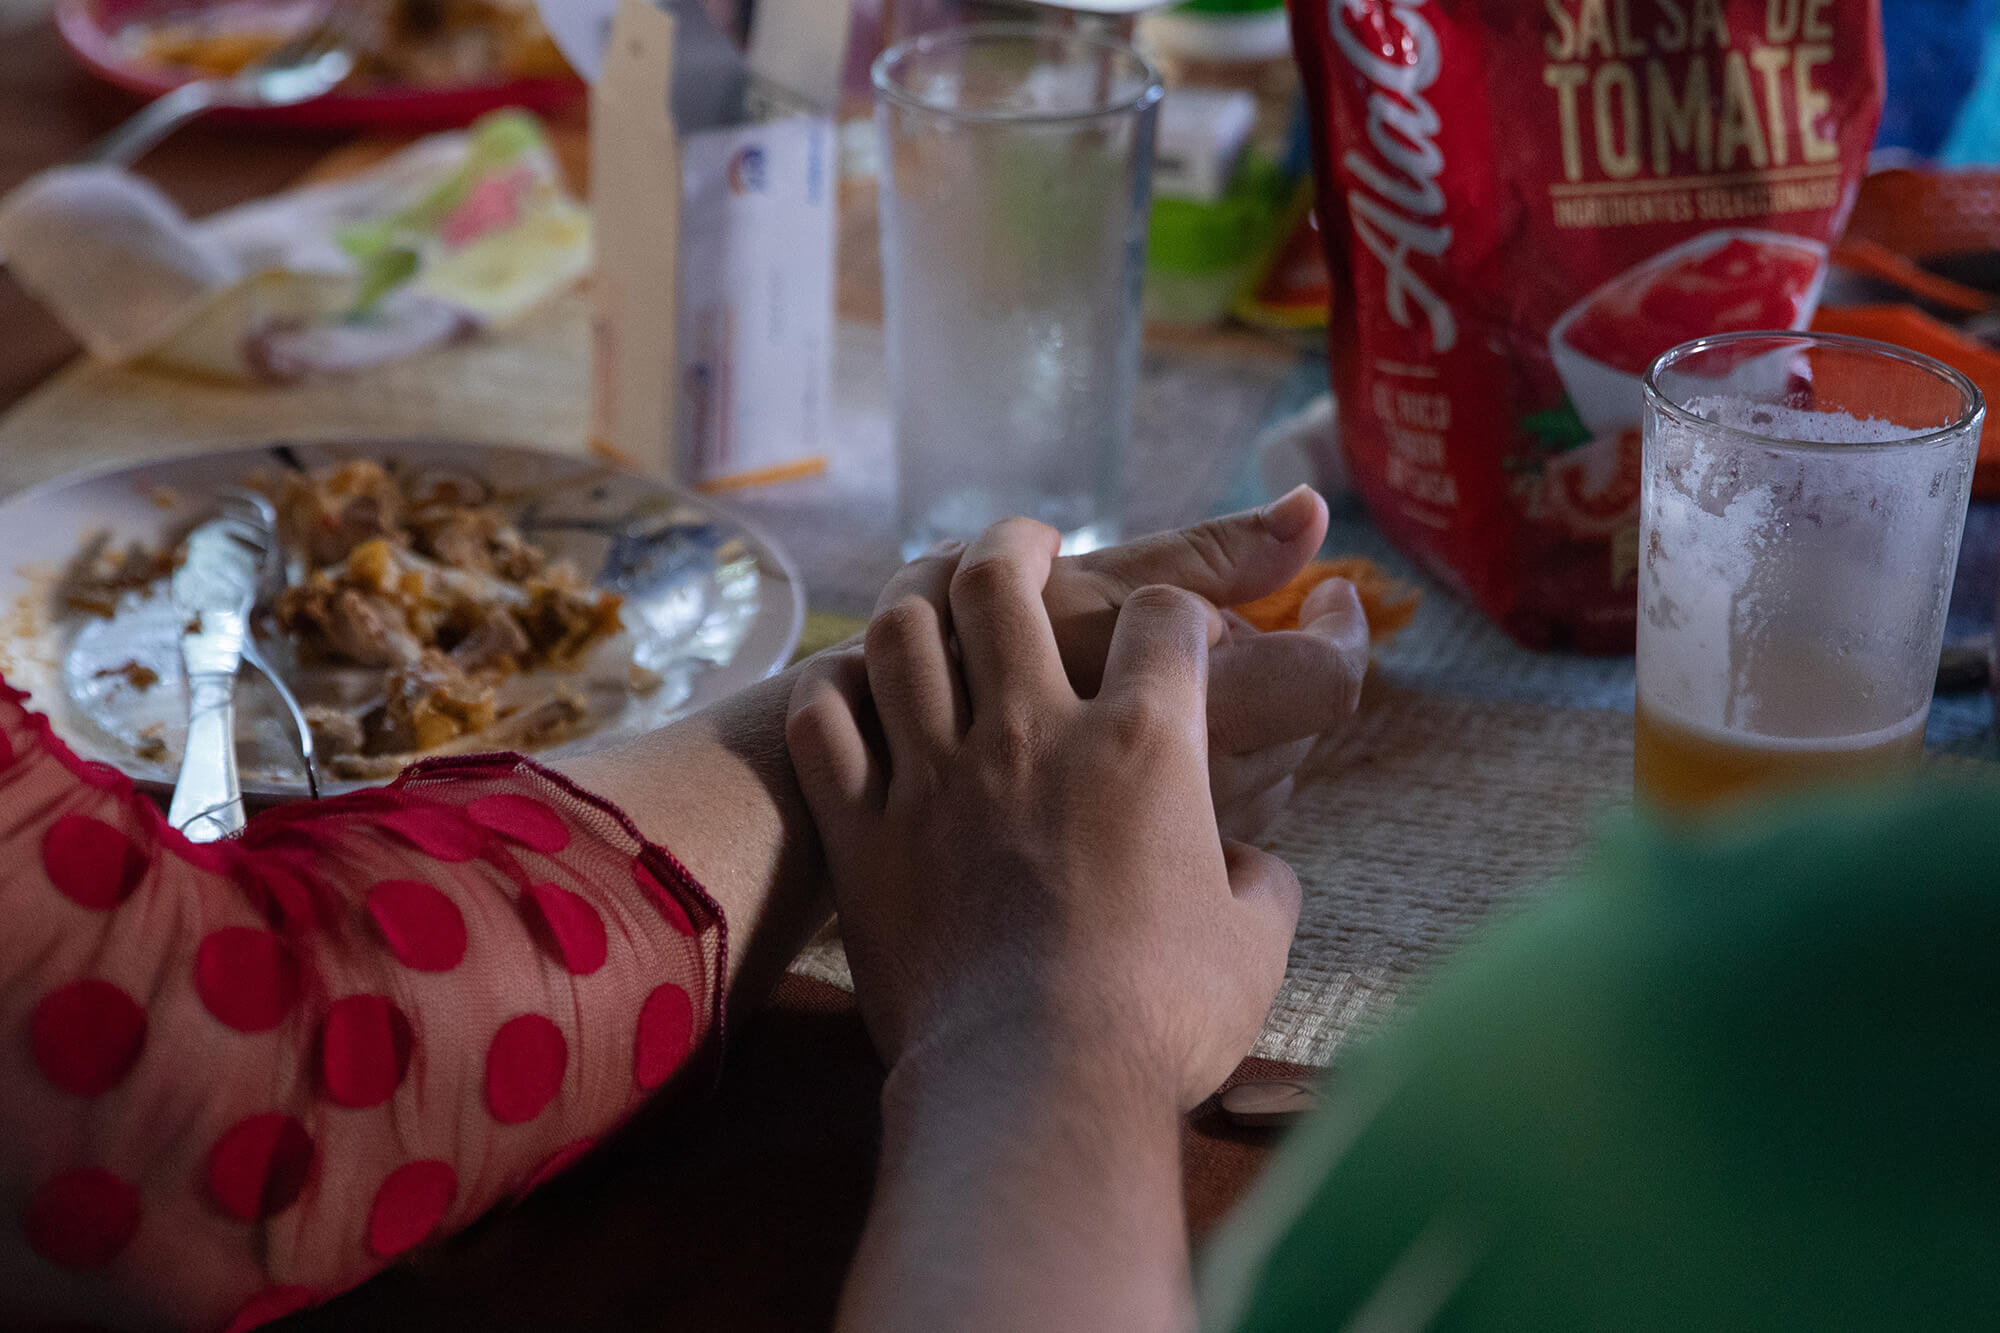 Alava, left, and her son Nicholas hold hands at the family kitchen table. A close up image, Alava’s arm has a red sleeve with red polka dots, and a plate with food is to her left. At right is a cup with juice in it and a bag of ketchup.